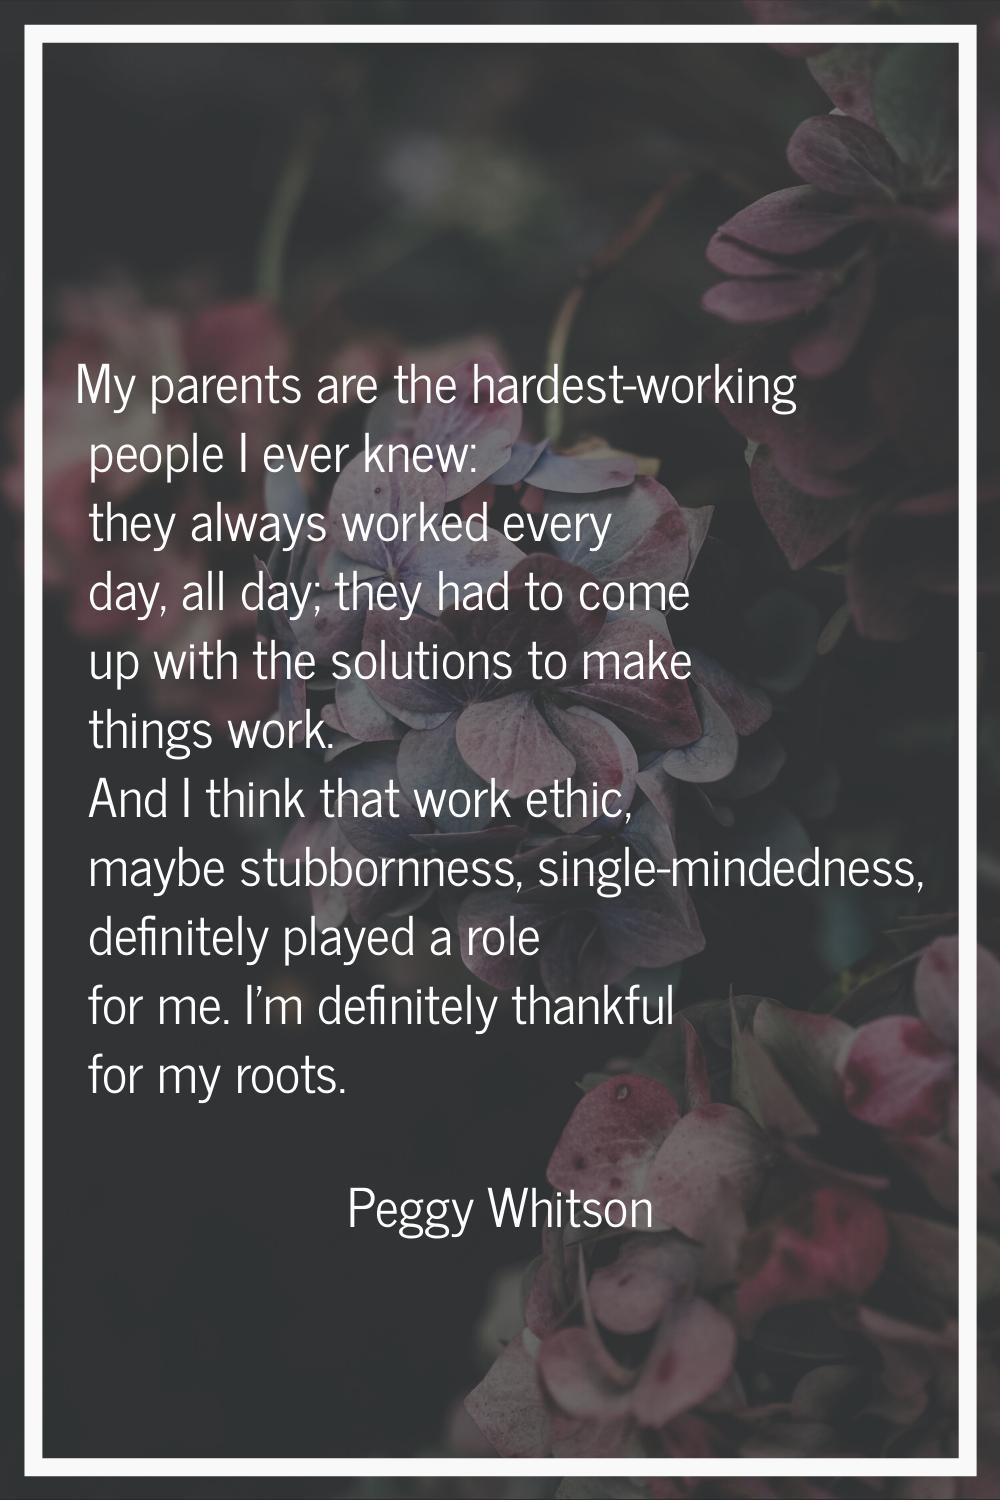 My parents are the hardest-working people I ever knew: they always worked every day, all day; they 